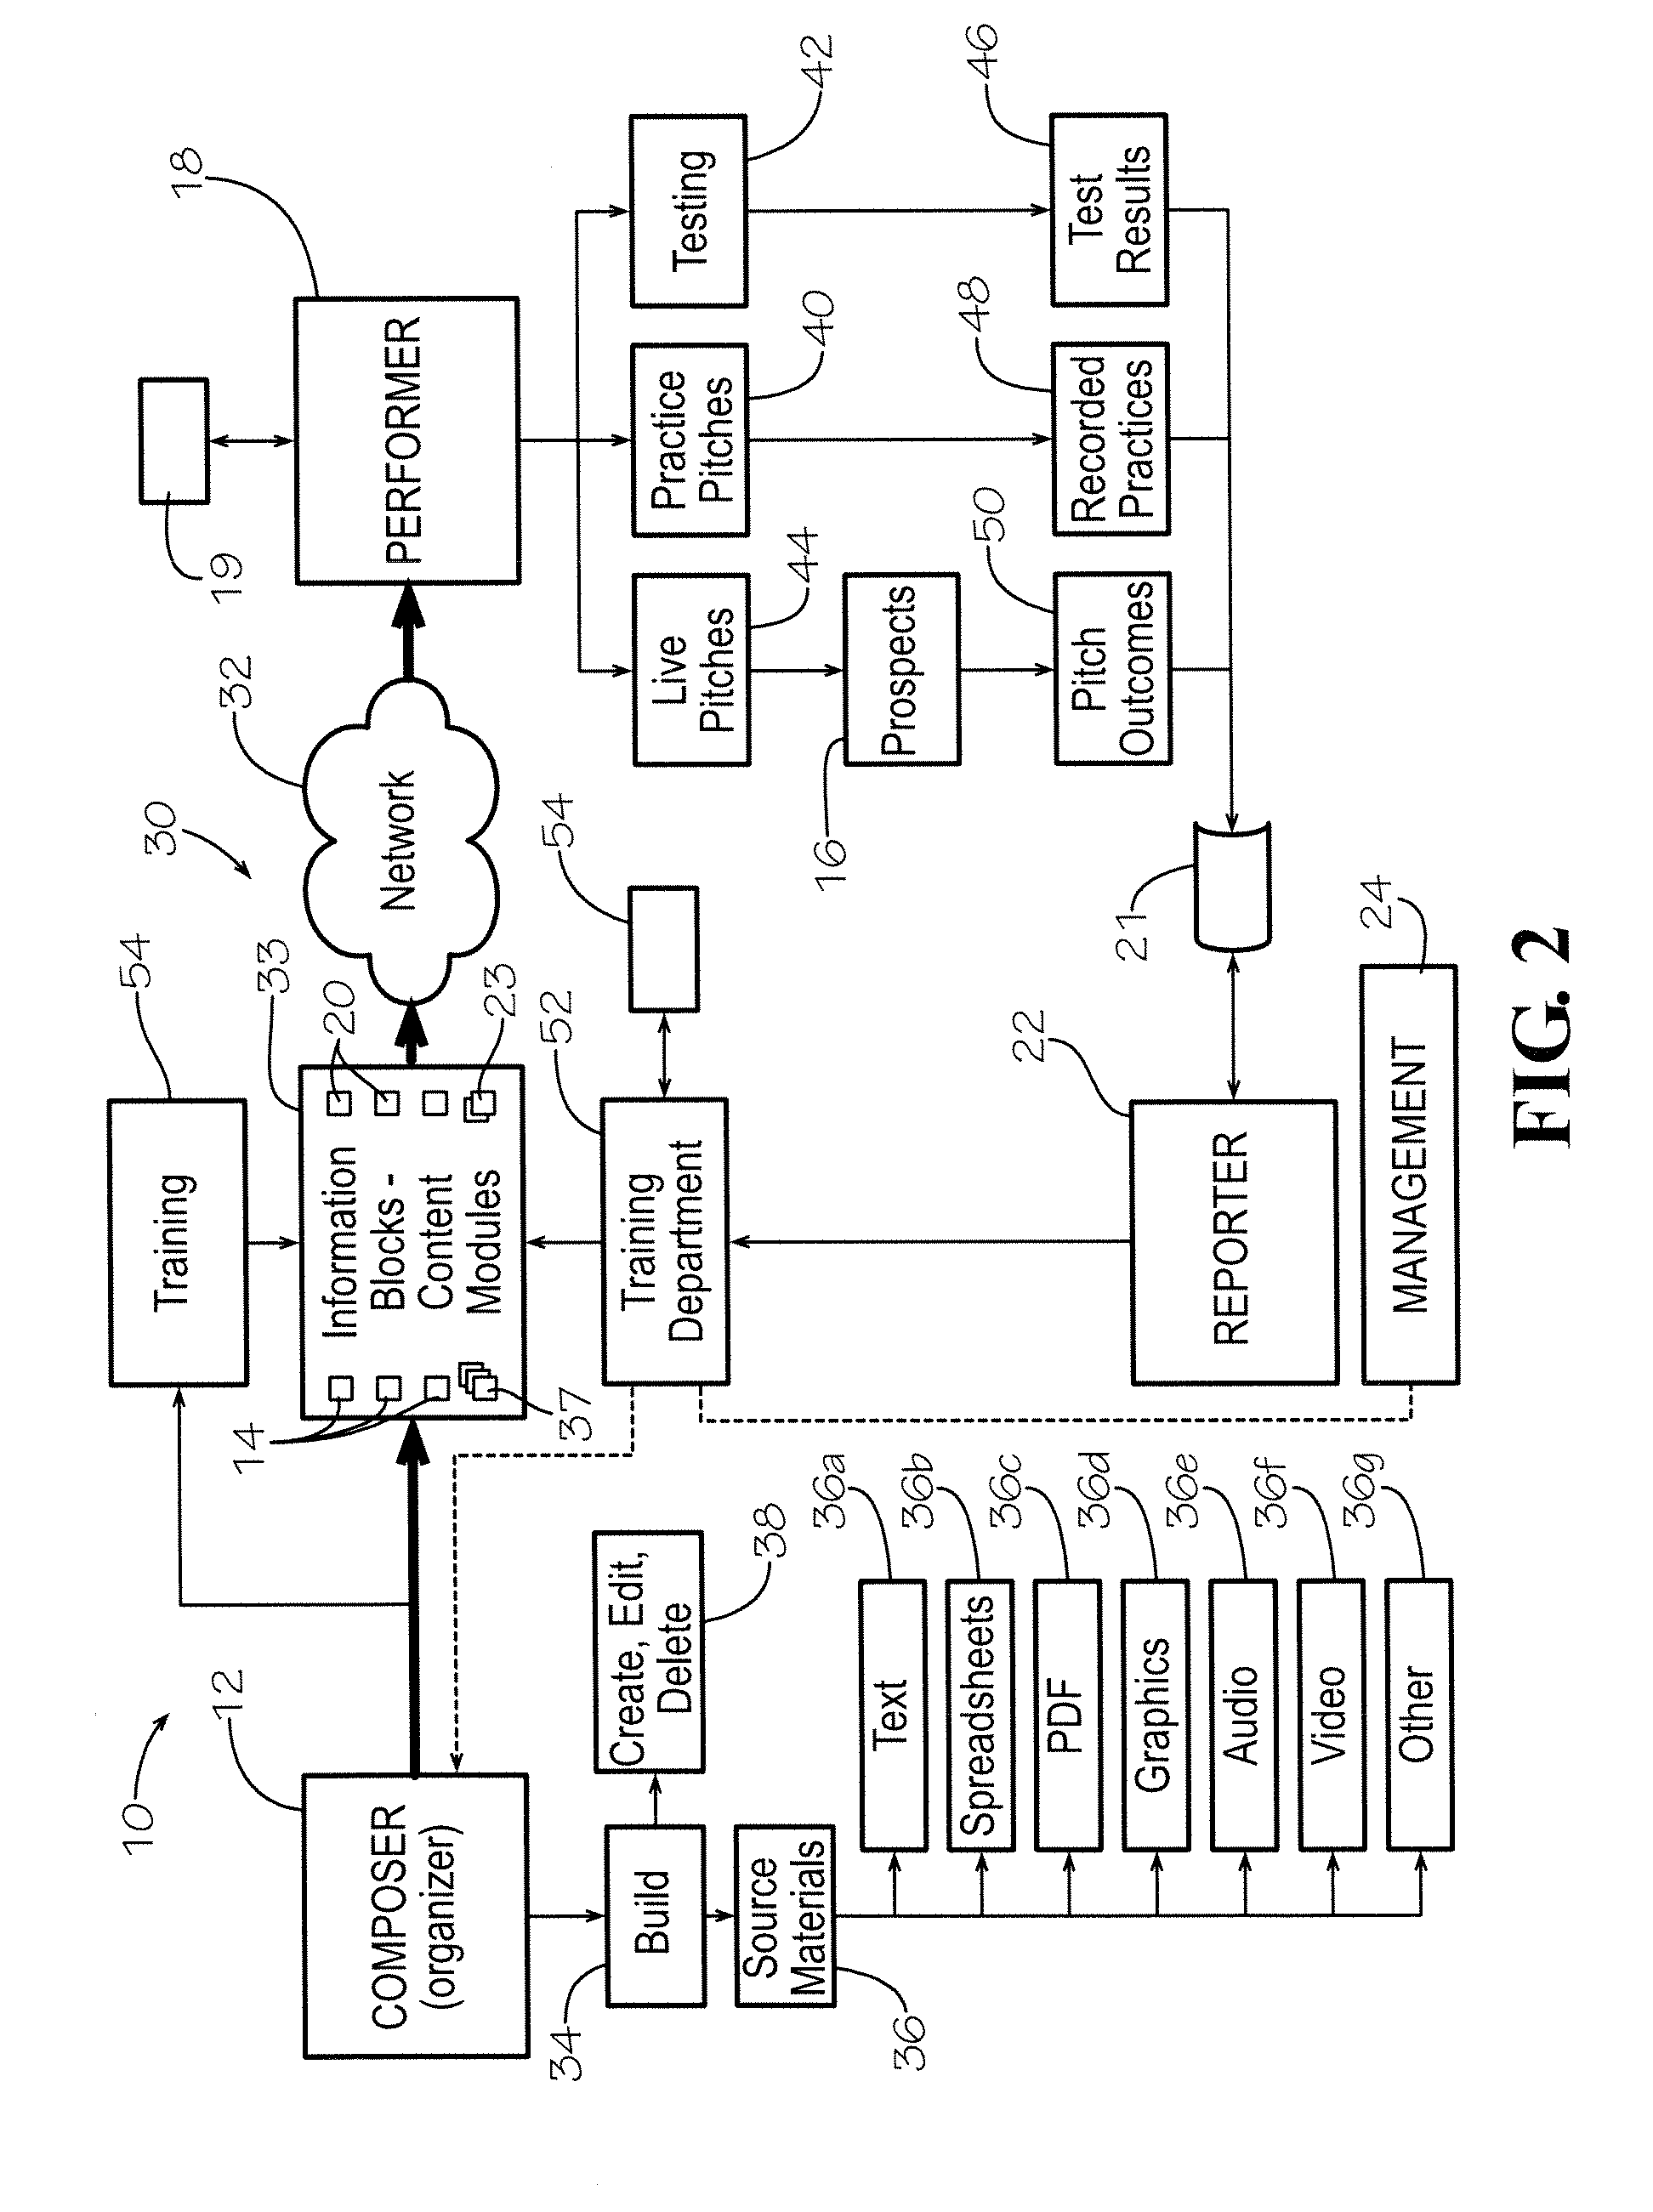 Presentation apparatus and method providing composer content control and presenter selection flexibility for crafting presentations